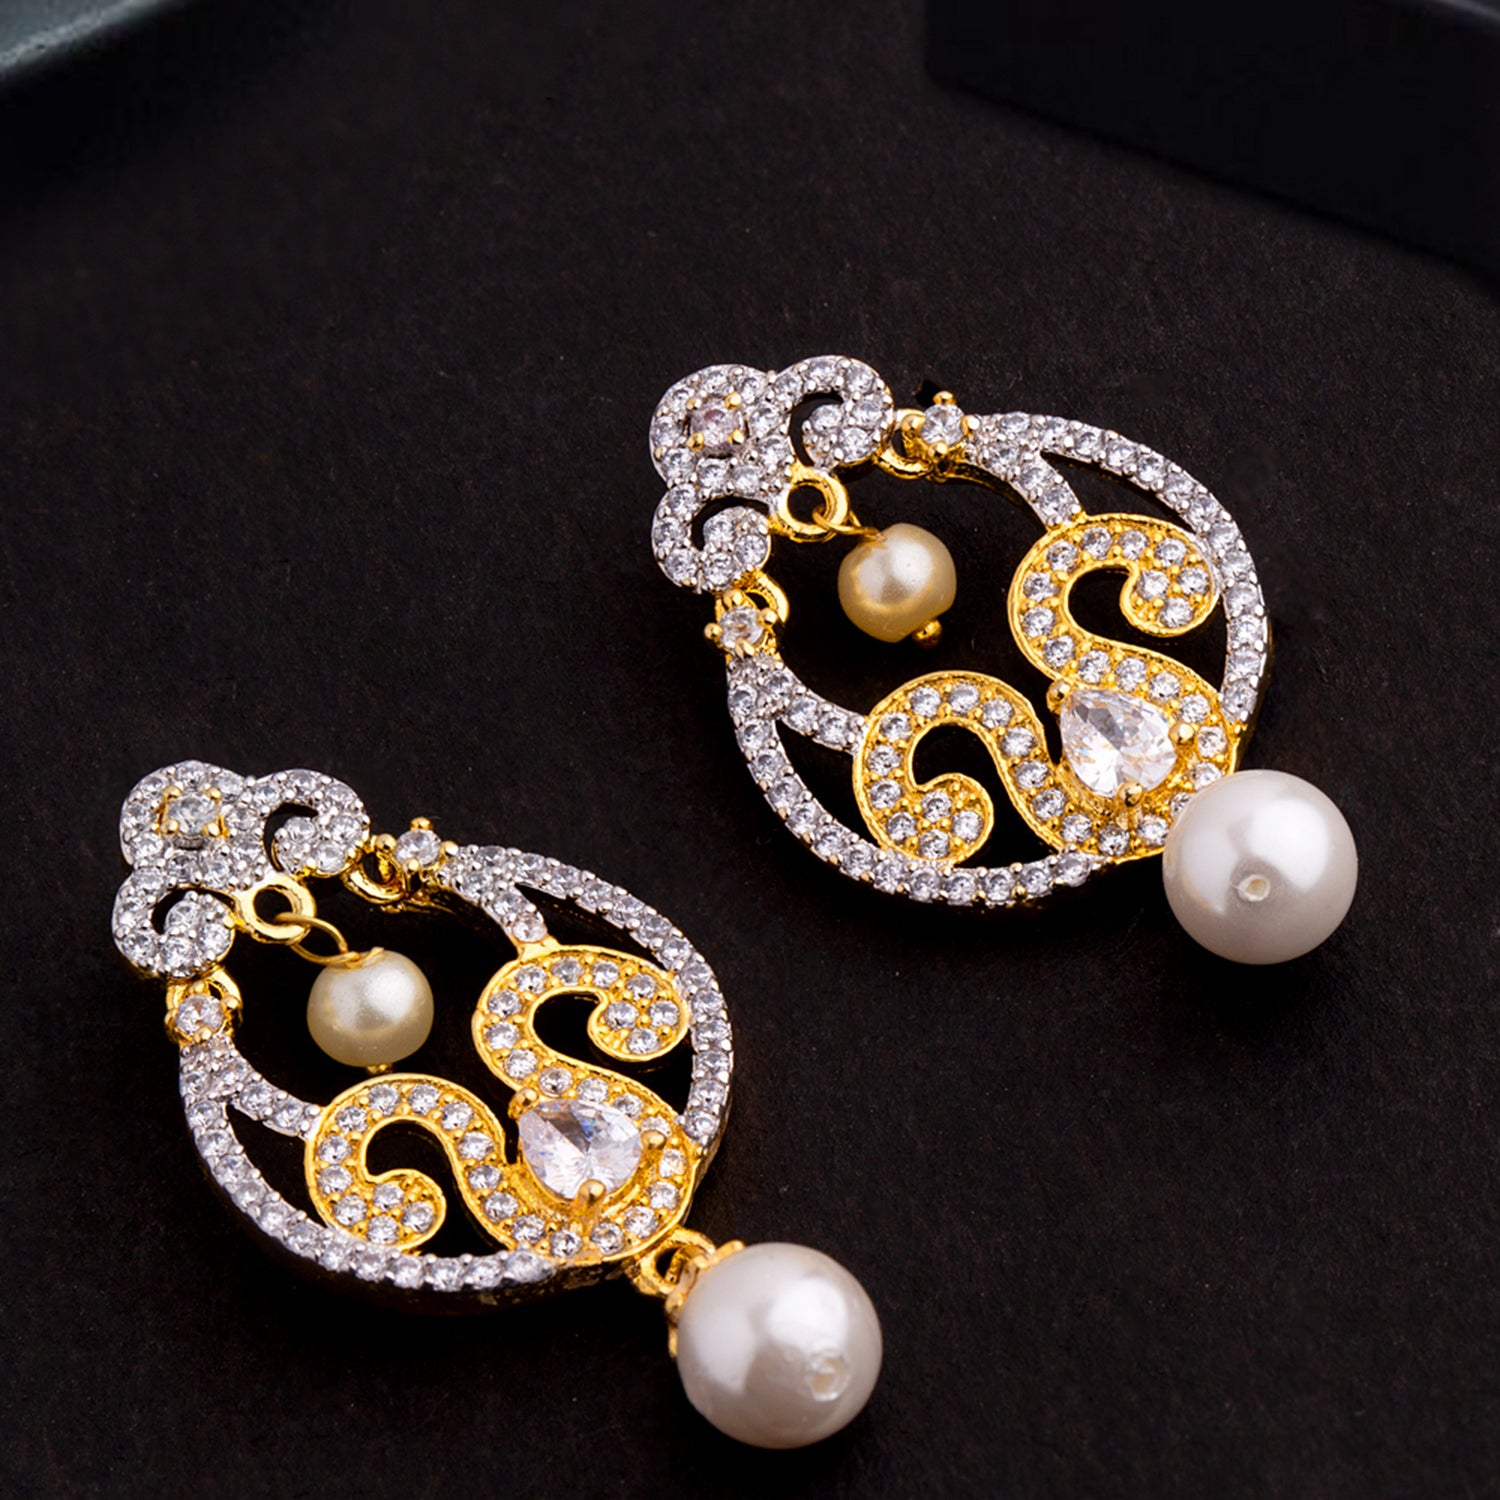 Faux Pearls and CZ Gems Earrings